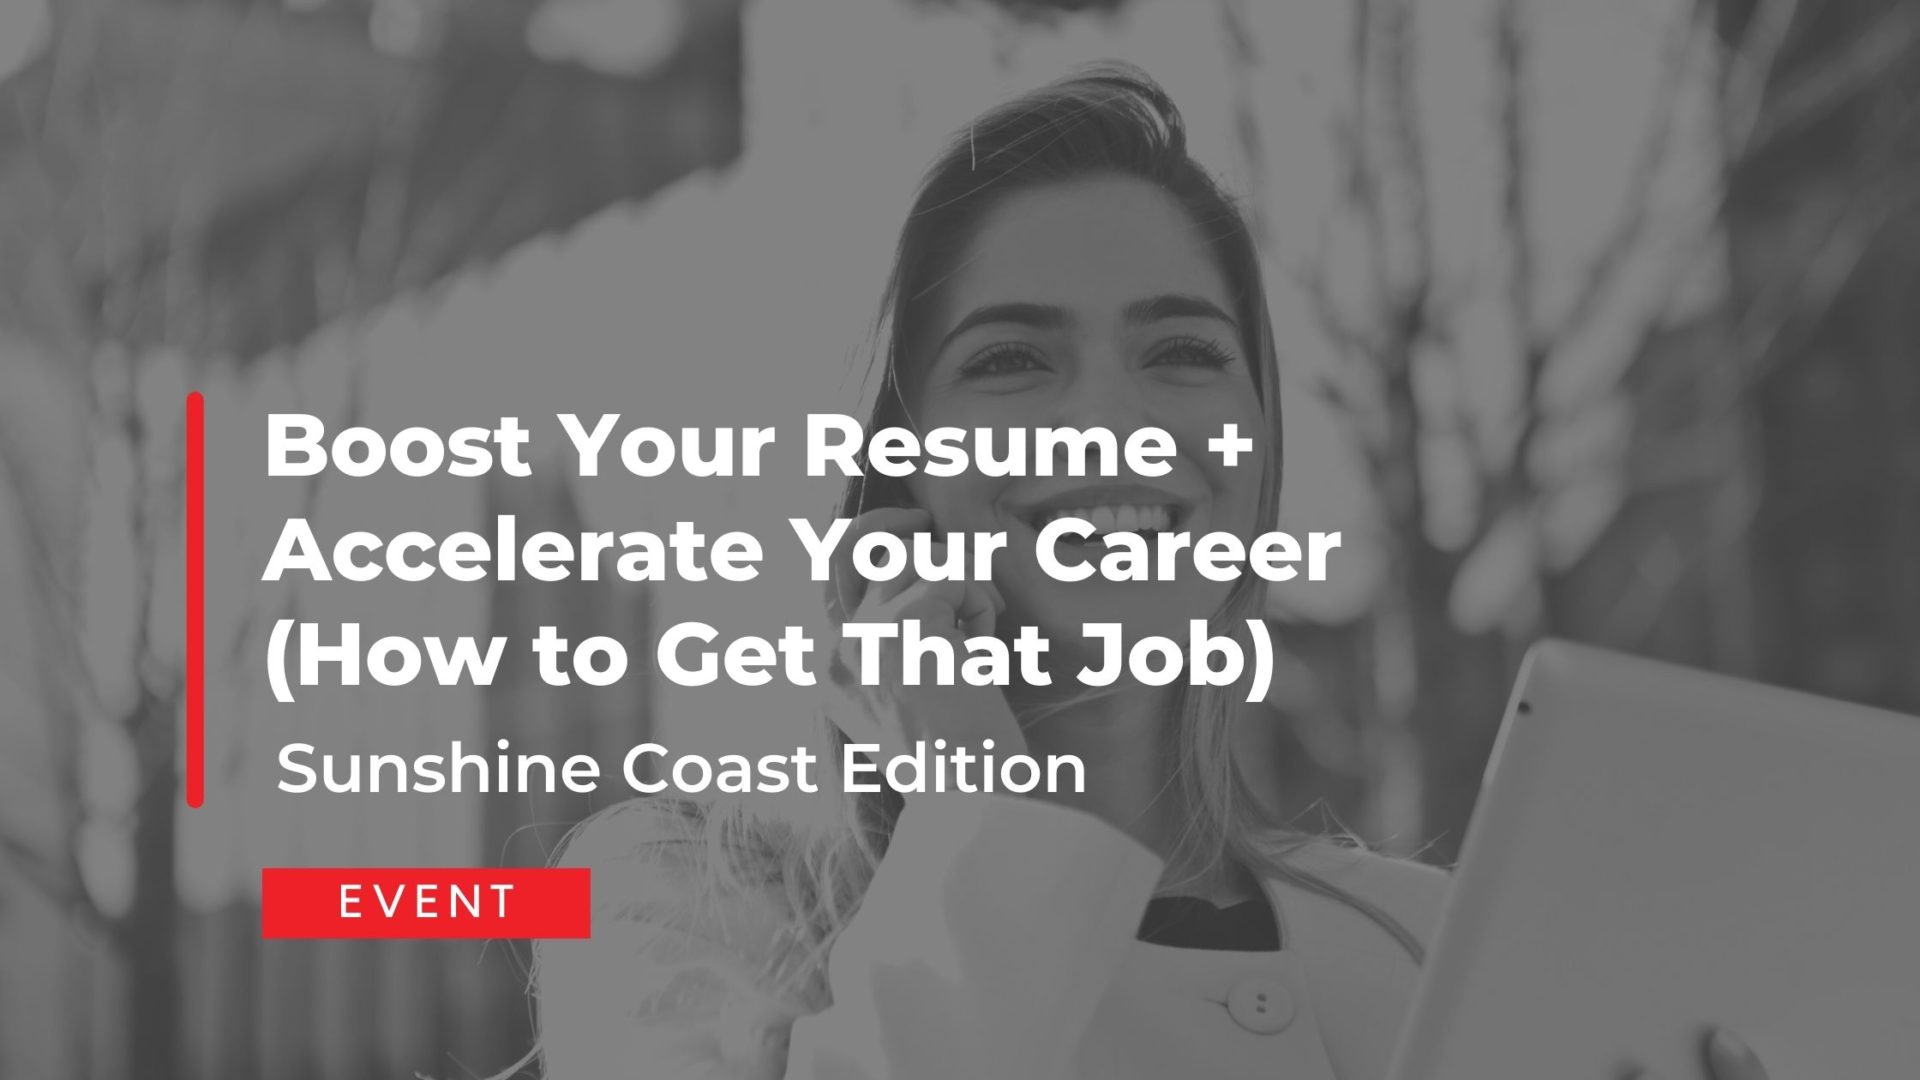 Boost Your Resume + Accelerate Your Career | How to Get That Job (Sunshine Coast Edition)